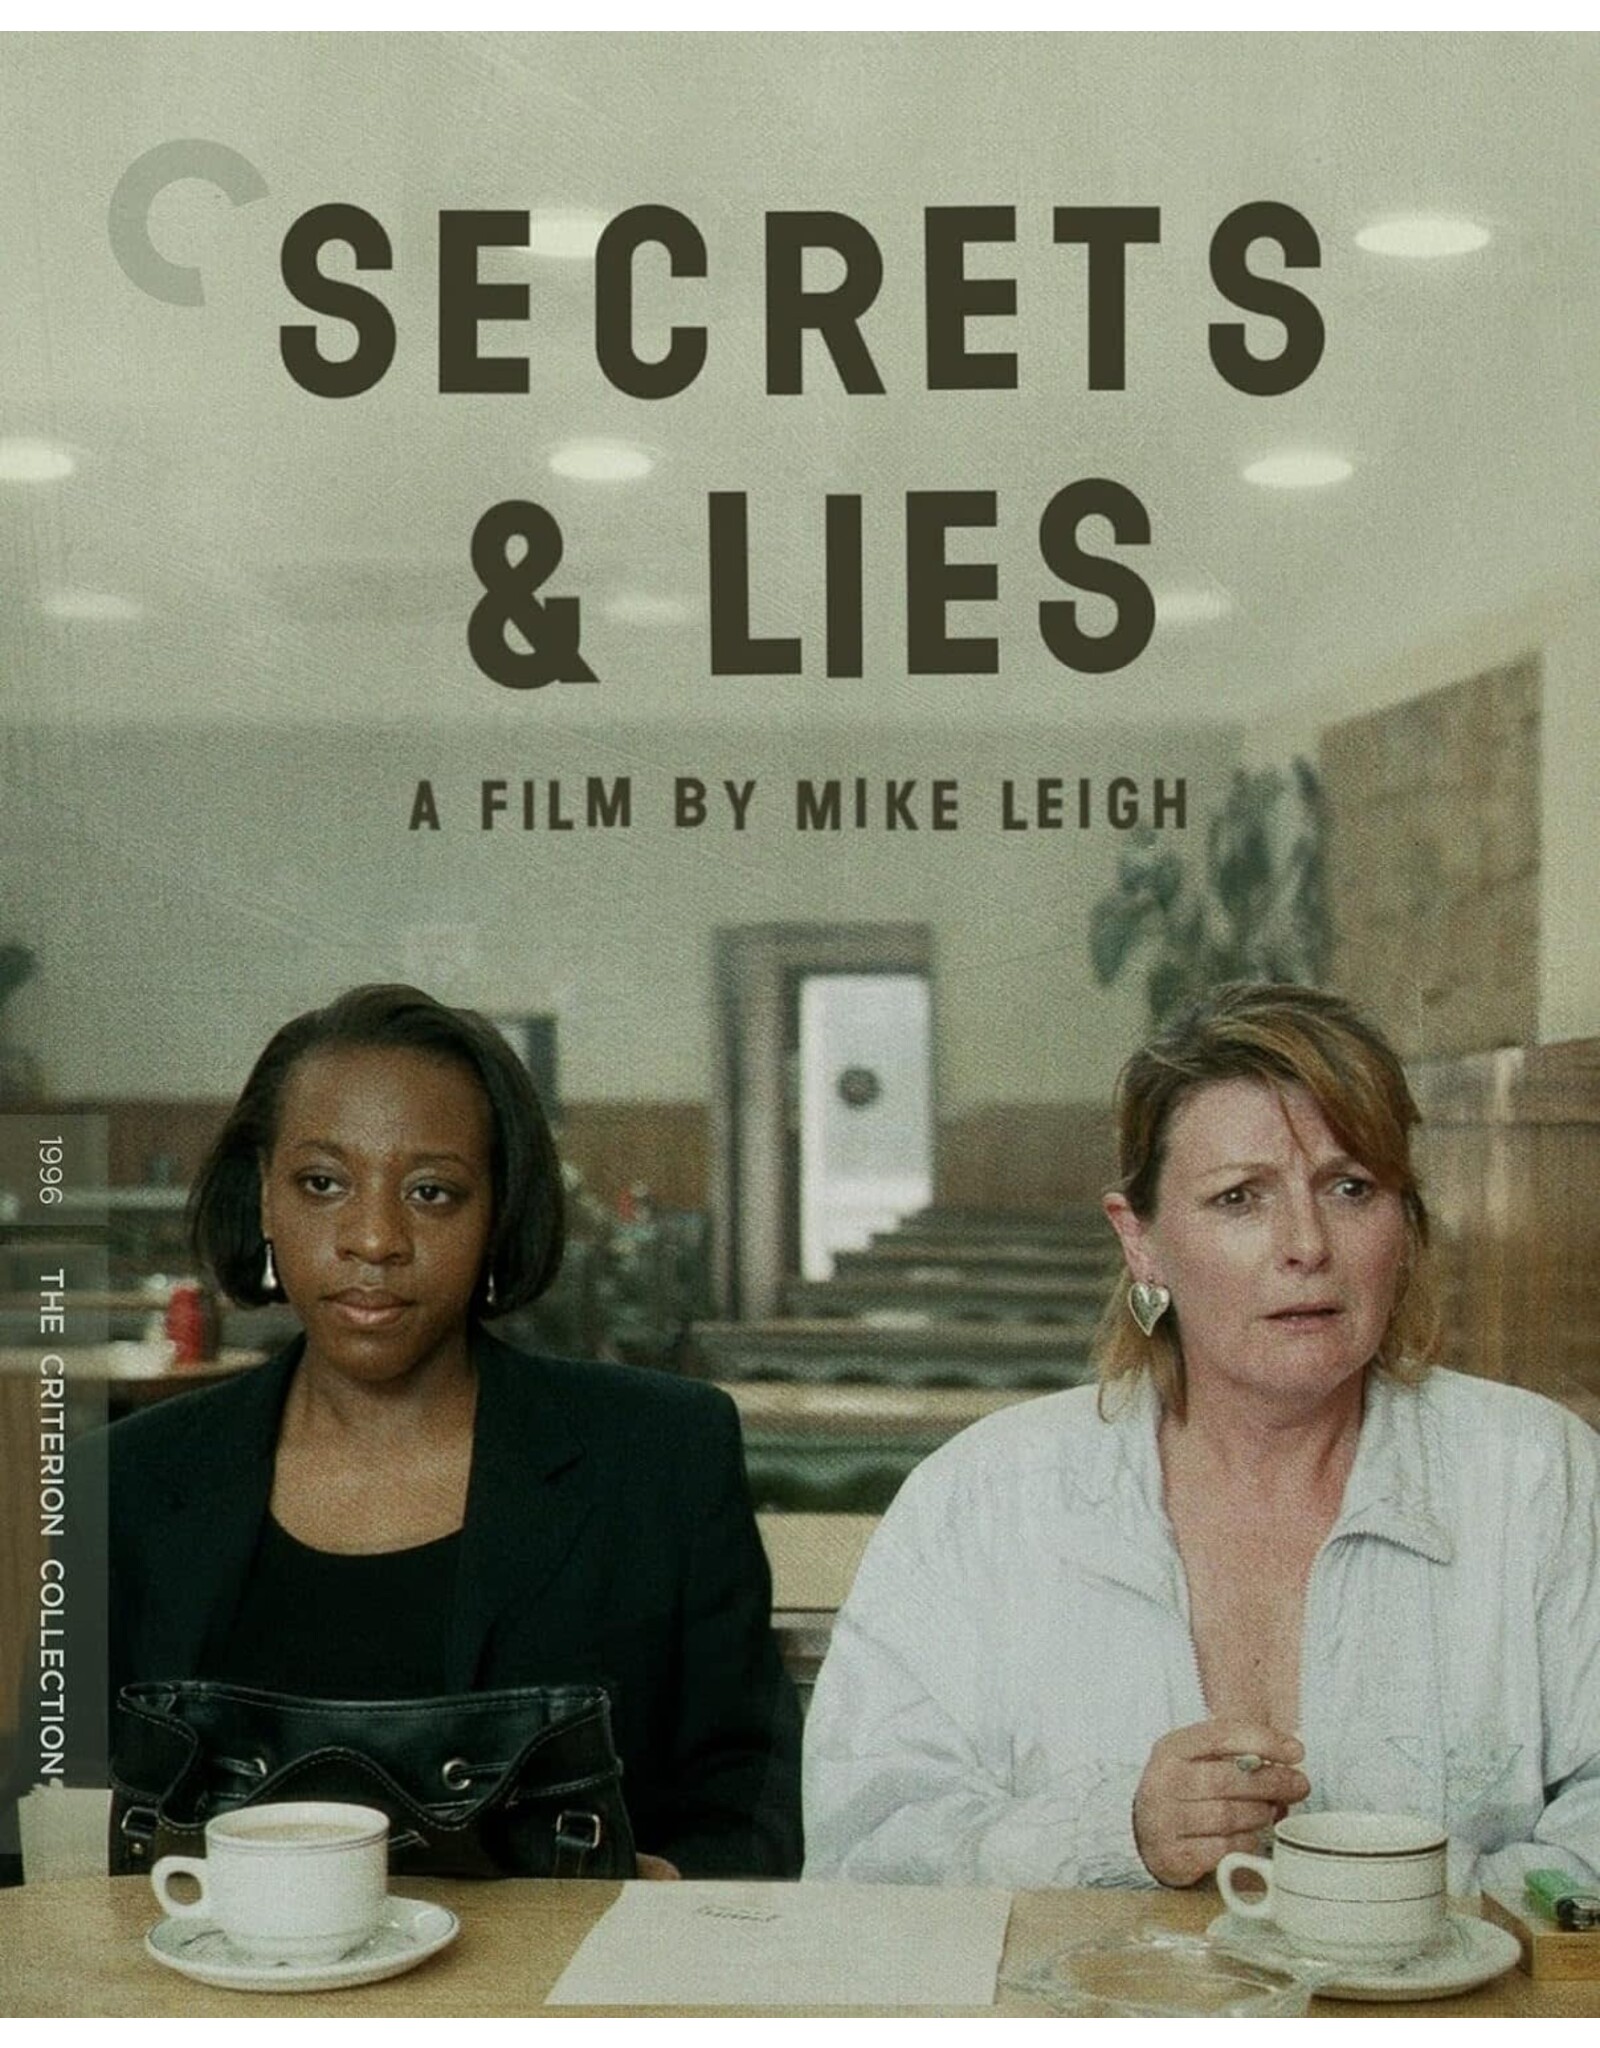 Criterion Collection Secrets & Lies - Criterion Collection (Used)